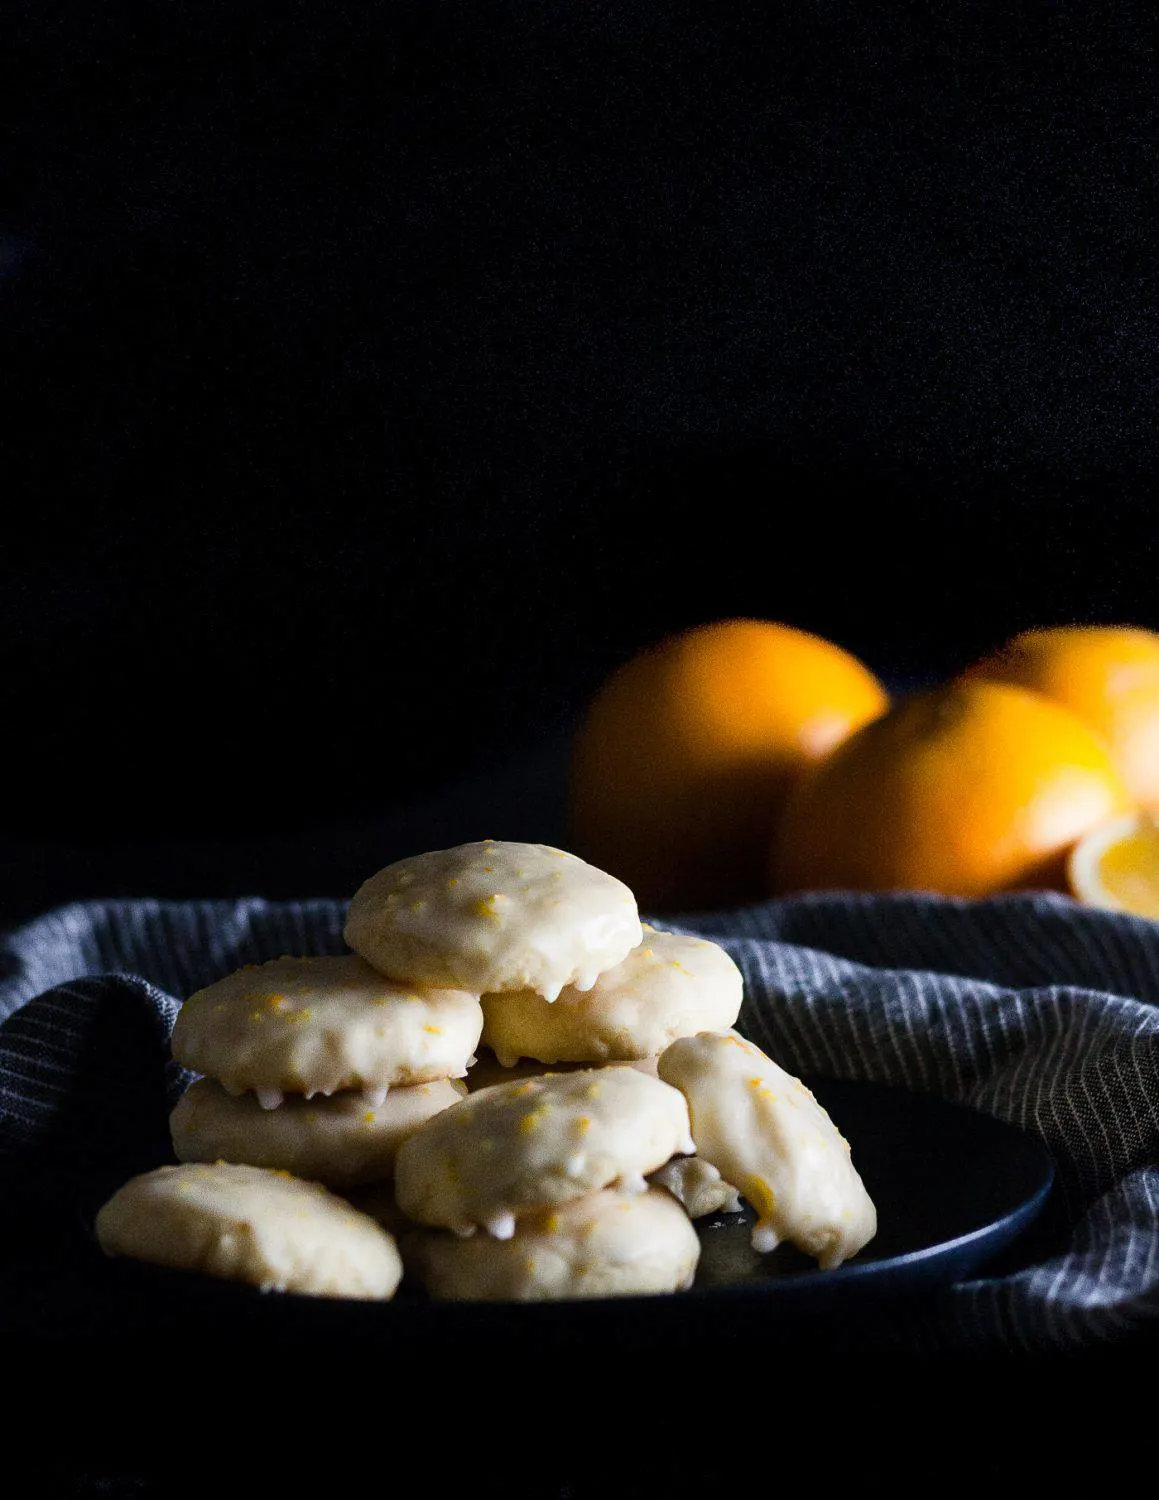  Orange cream cheese cookies are a cake like cookie perfect for citrus lovers. Naturally flavored with the perfect amount of fresh orange and topped with an easy orange cookie glaze, they're so easy to eat and share! * GoodieGodmother.com